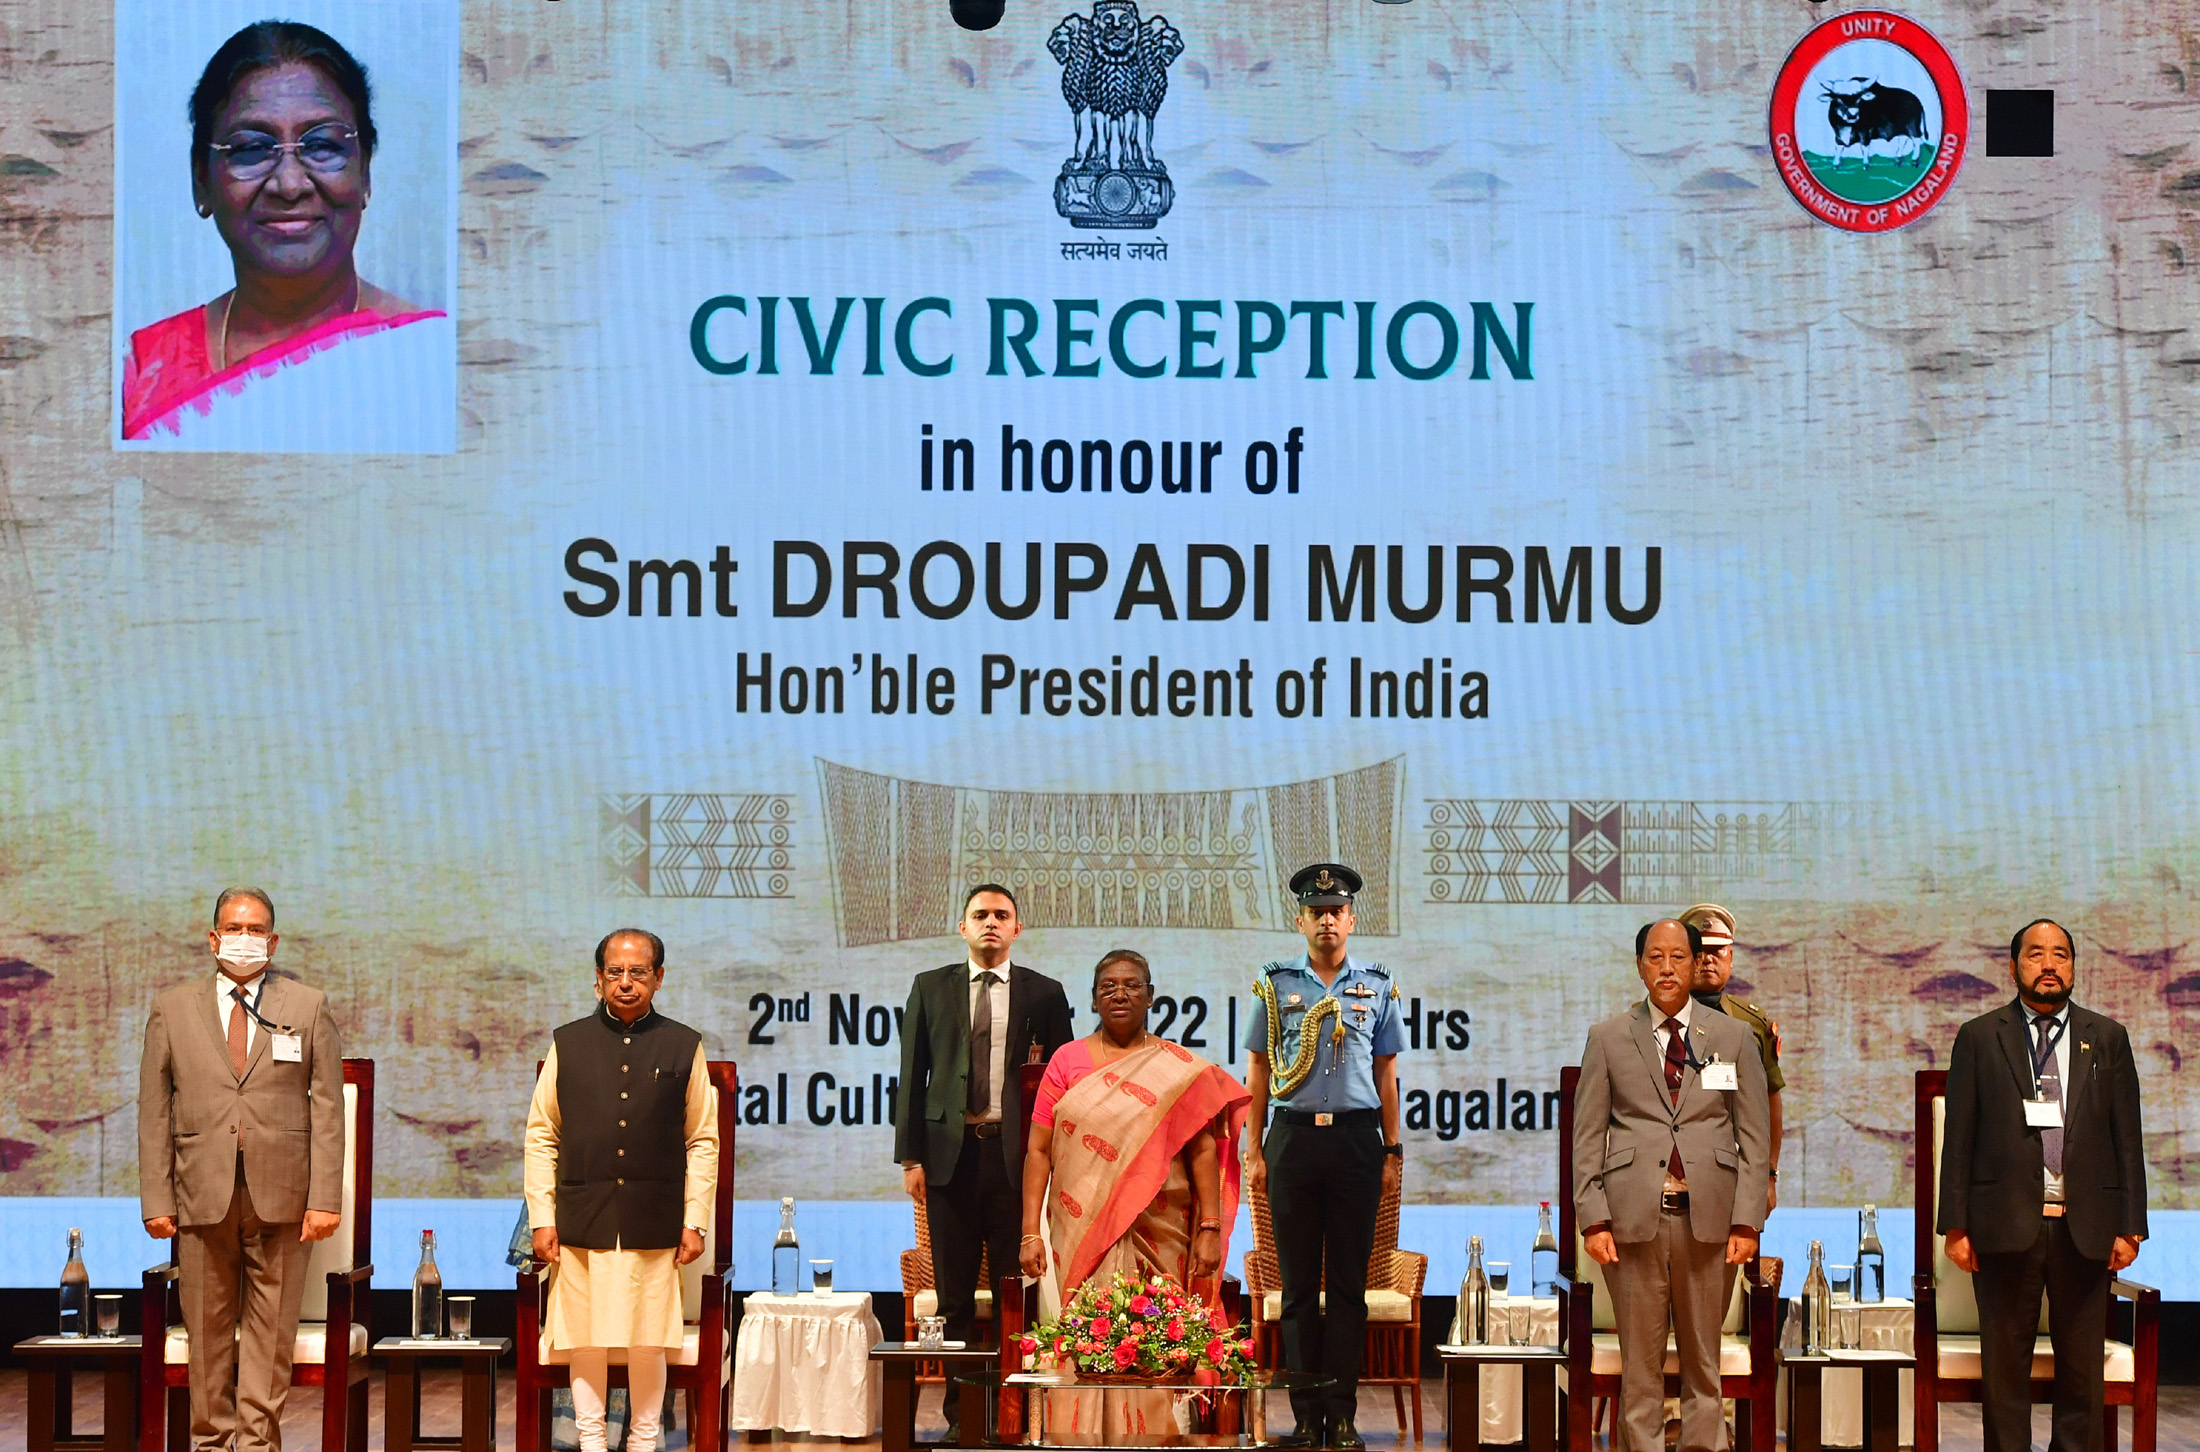 The President, Smt. Droupadi Murmu virtually inaugurates and lays the foundation stone for various projects related to education, road infrastructure and financial sector, in Kohima on November 02, 2022.